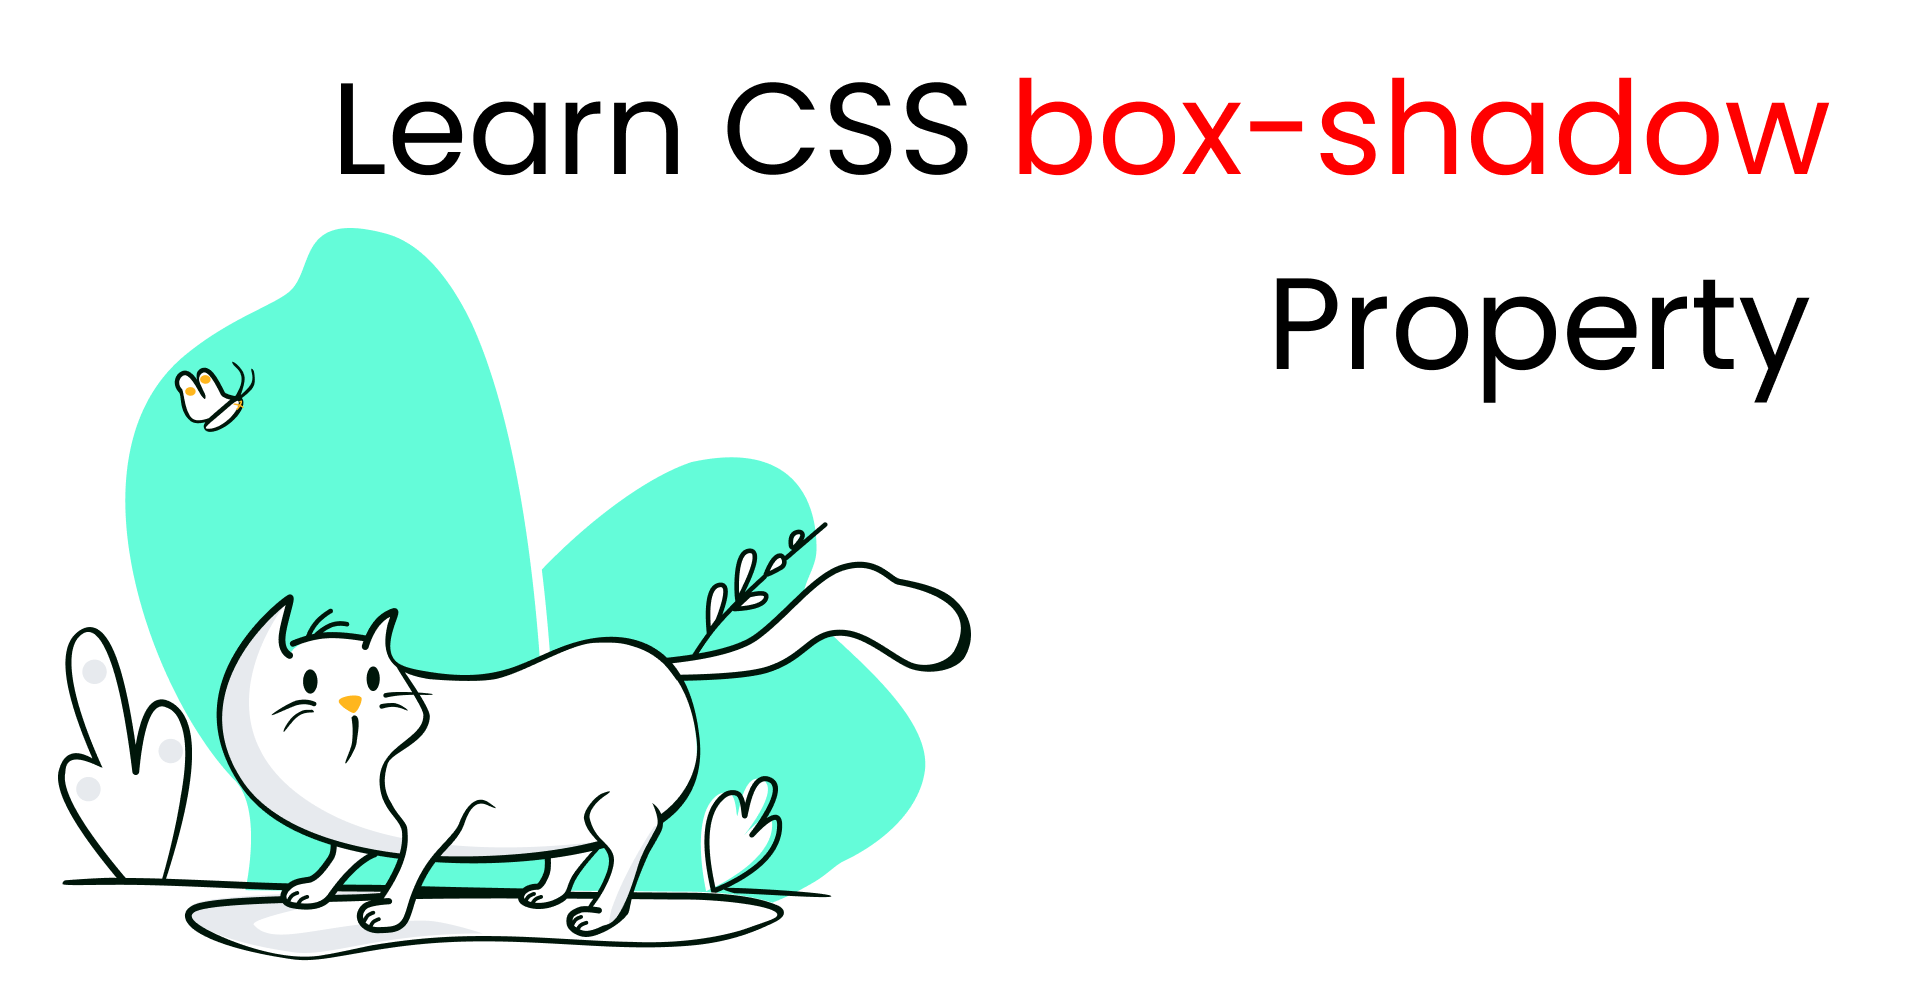 Learn the CSS Box - Shadow Property by Coding a Beautiful Button